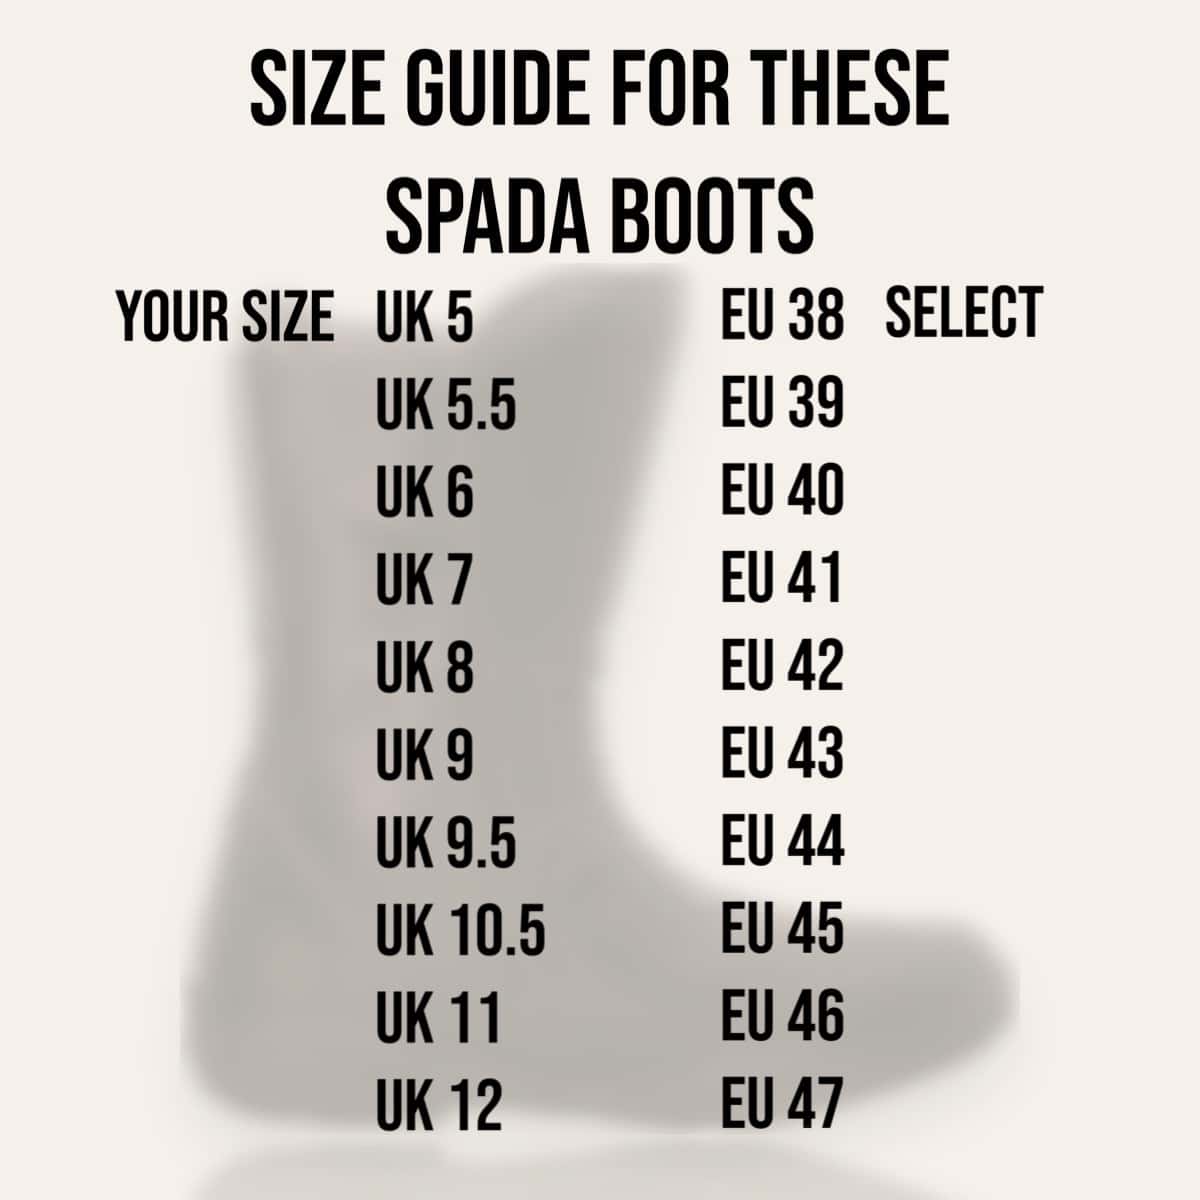 Spada Hurricane 3 CE WP Boots Specifications - Size Guide